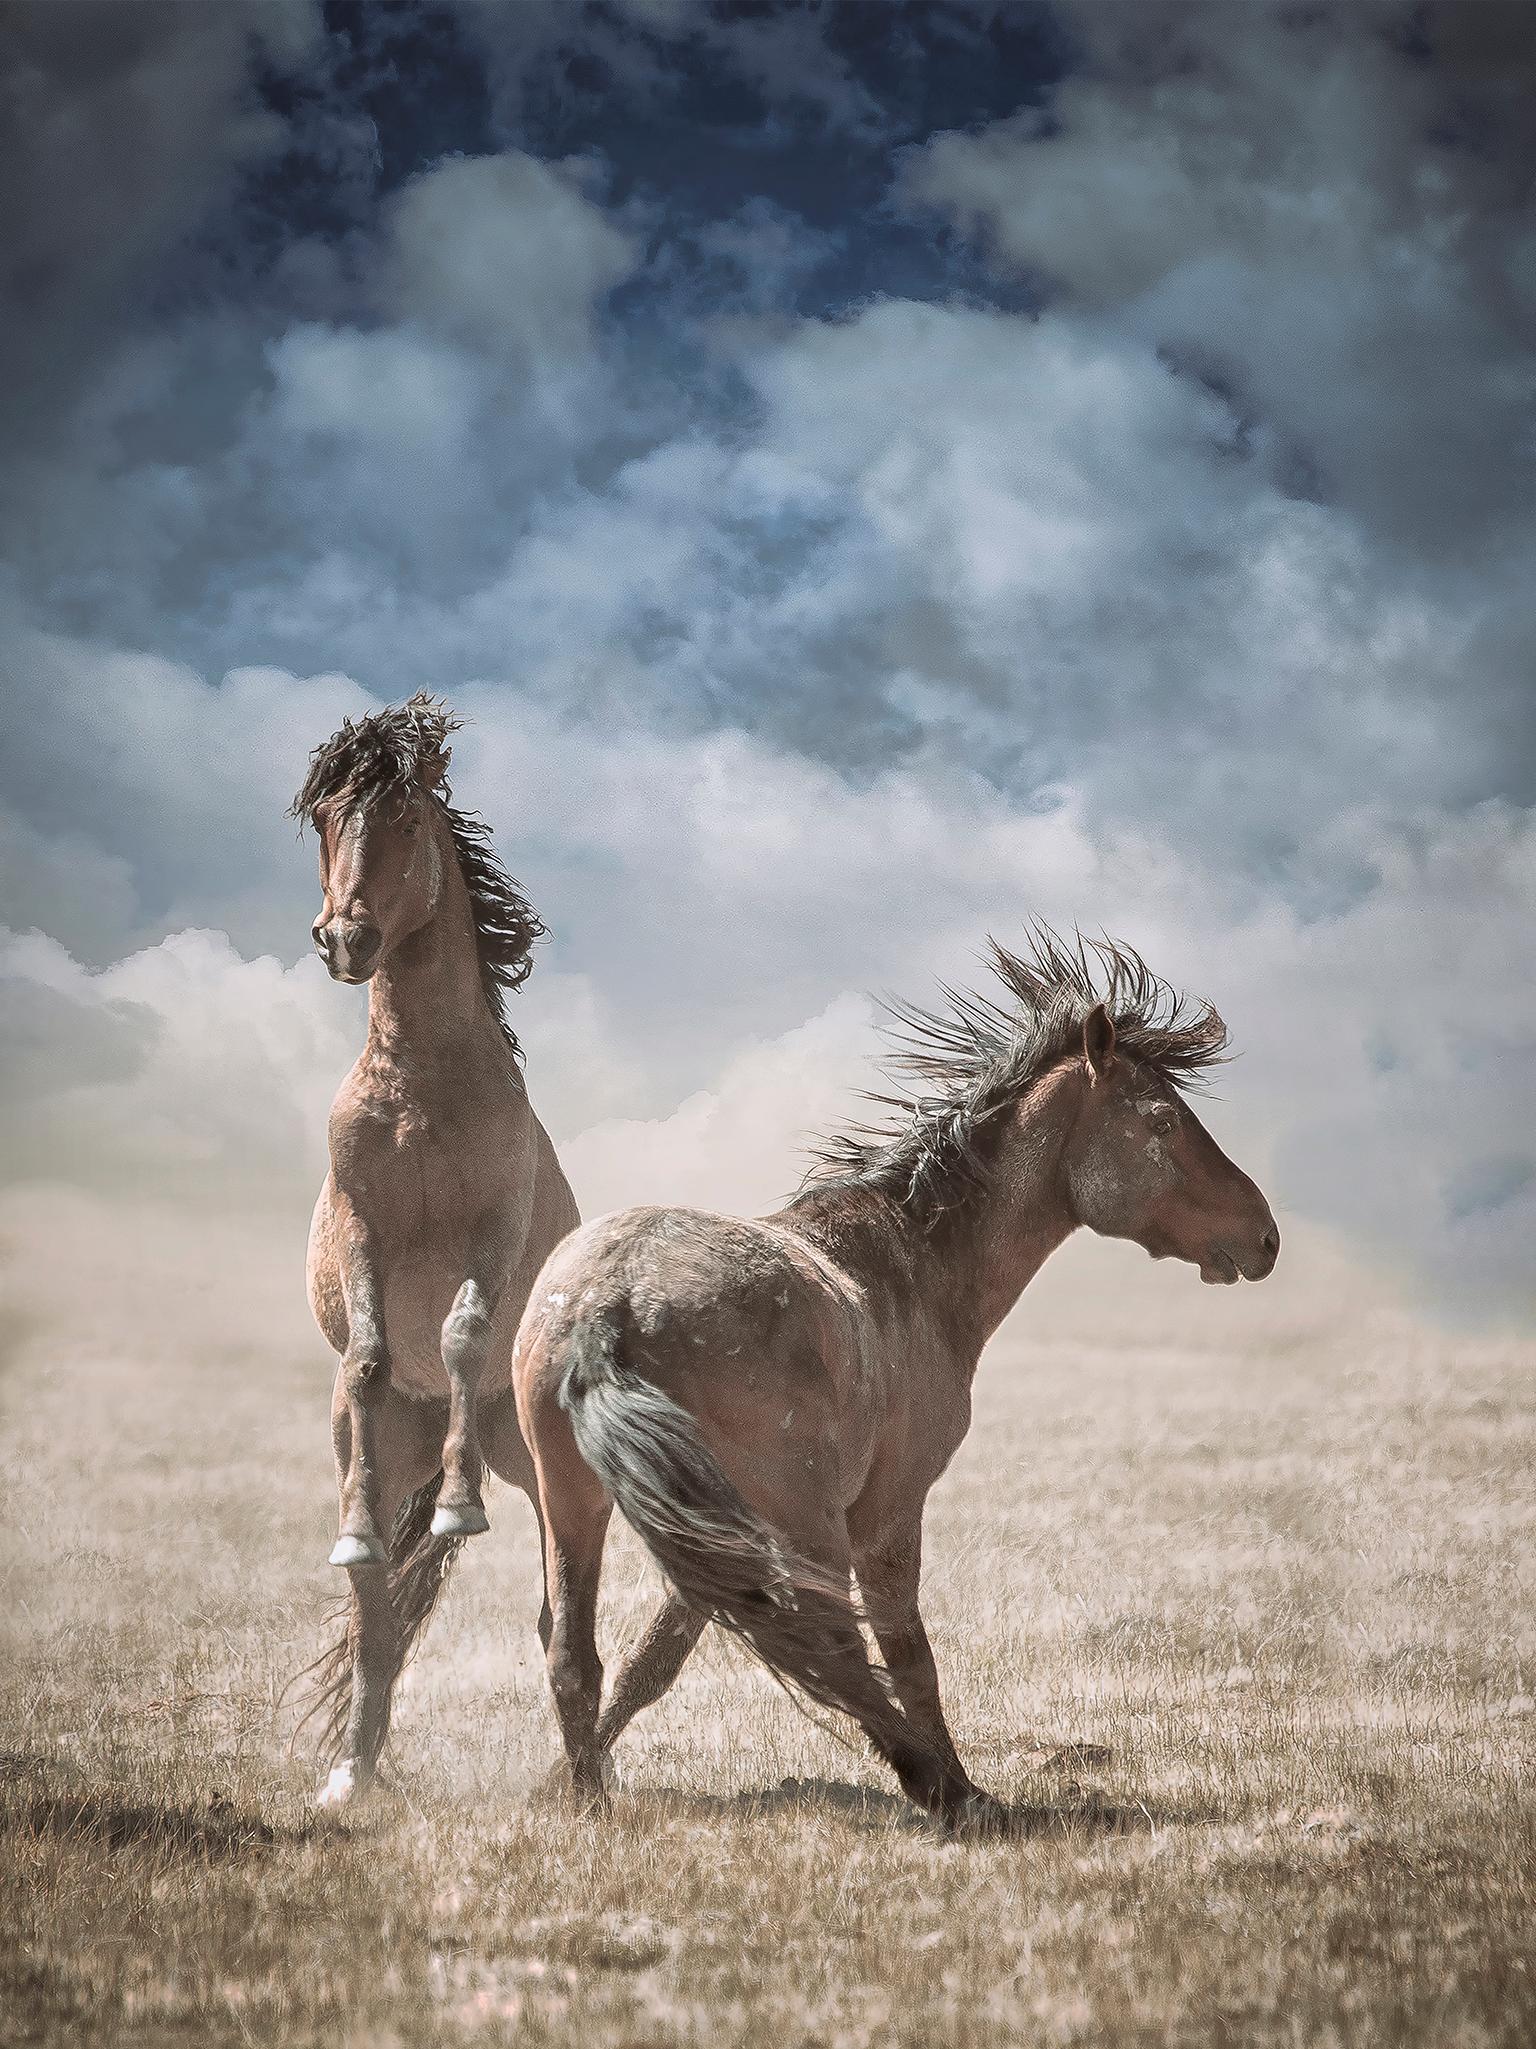 Shane Russeck Black and White Photograph - "Wonder Horses"  32 x 40  - Wild Horses - Wild Mustang Photography